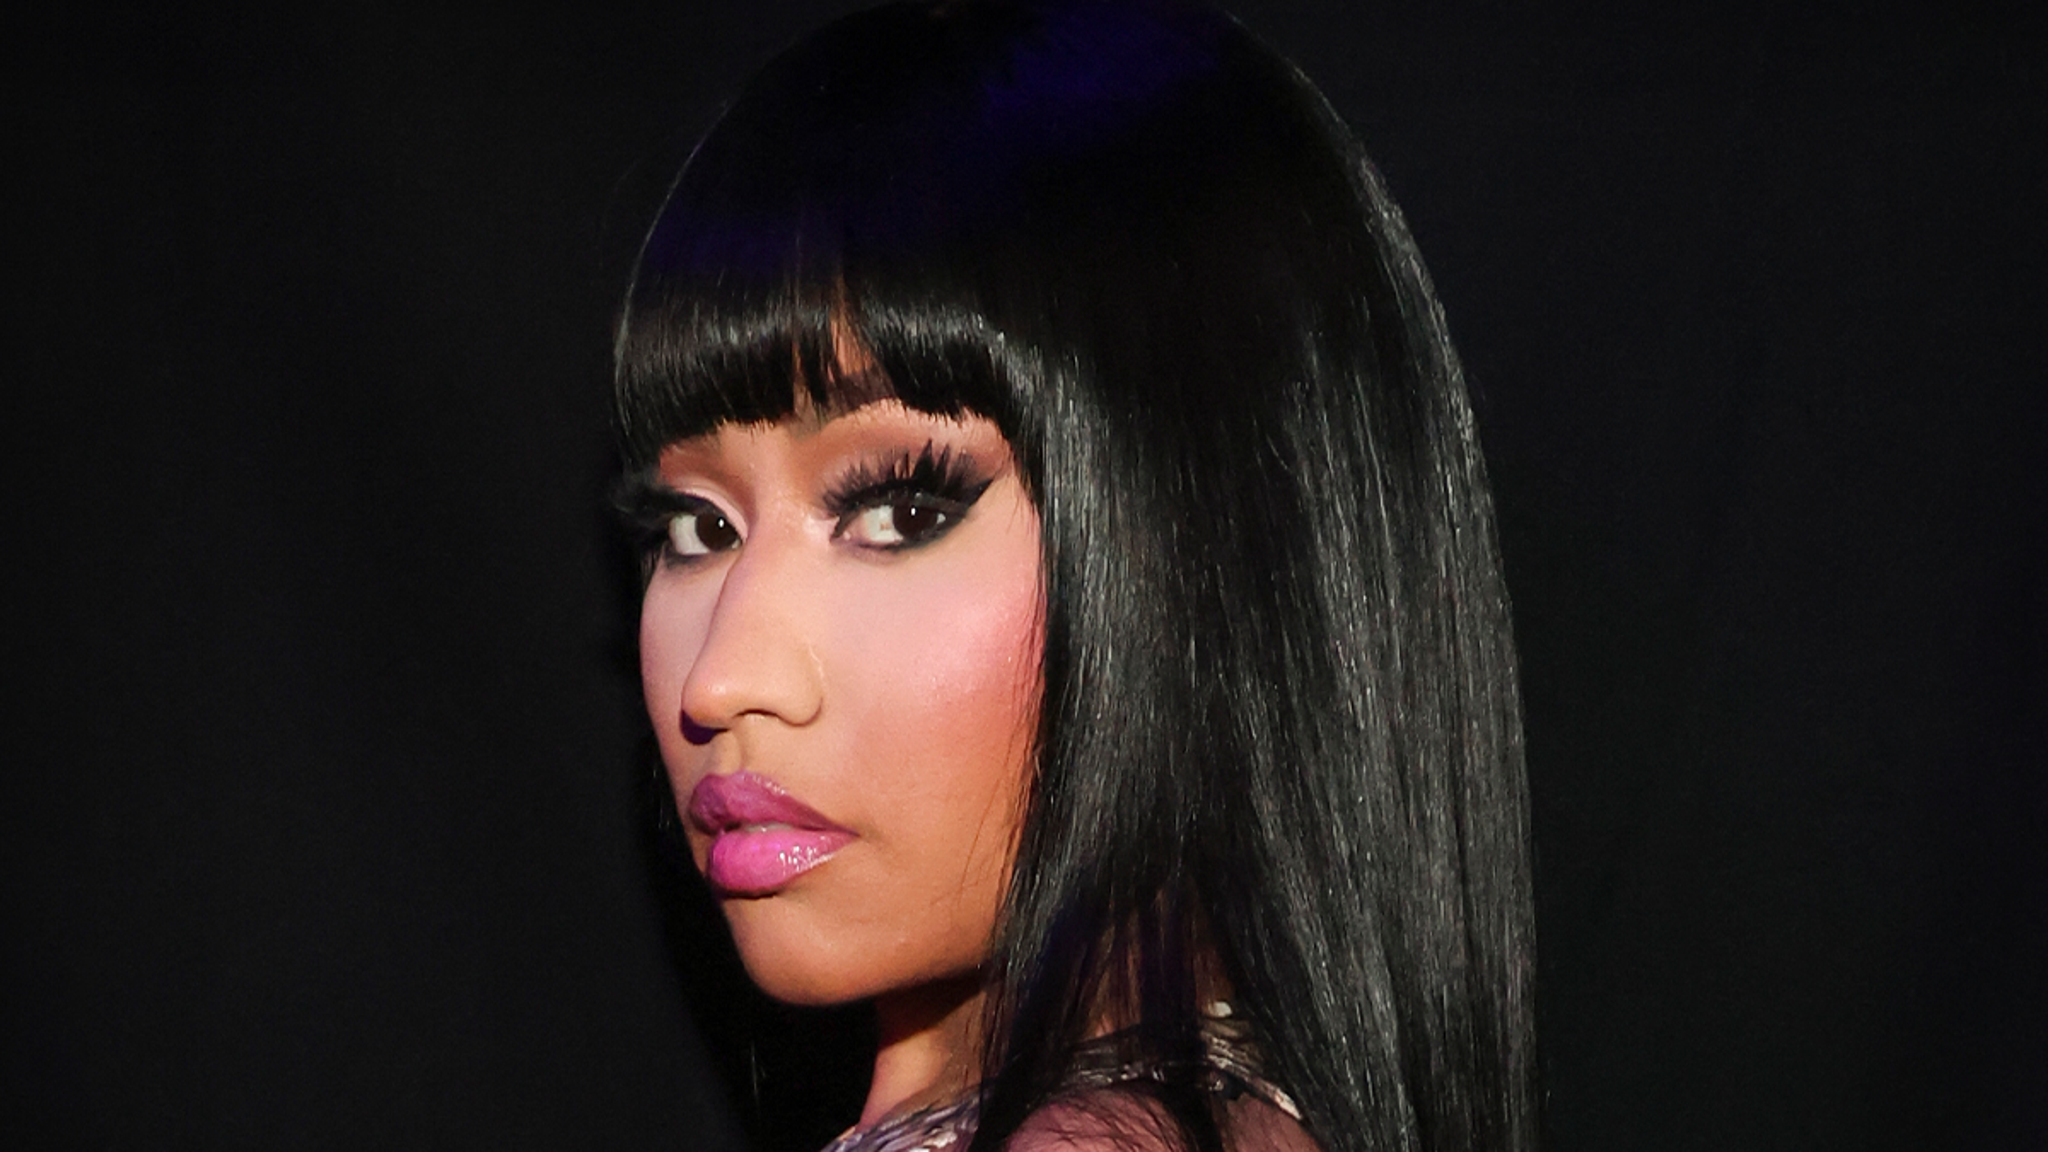 Nicki Minaj Offers College Help to 14-Year-Old Who Killed Man to Defend Mom